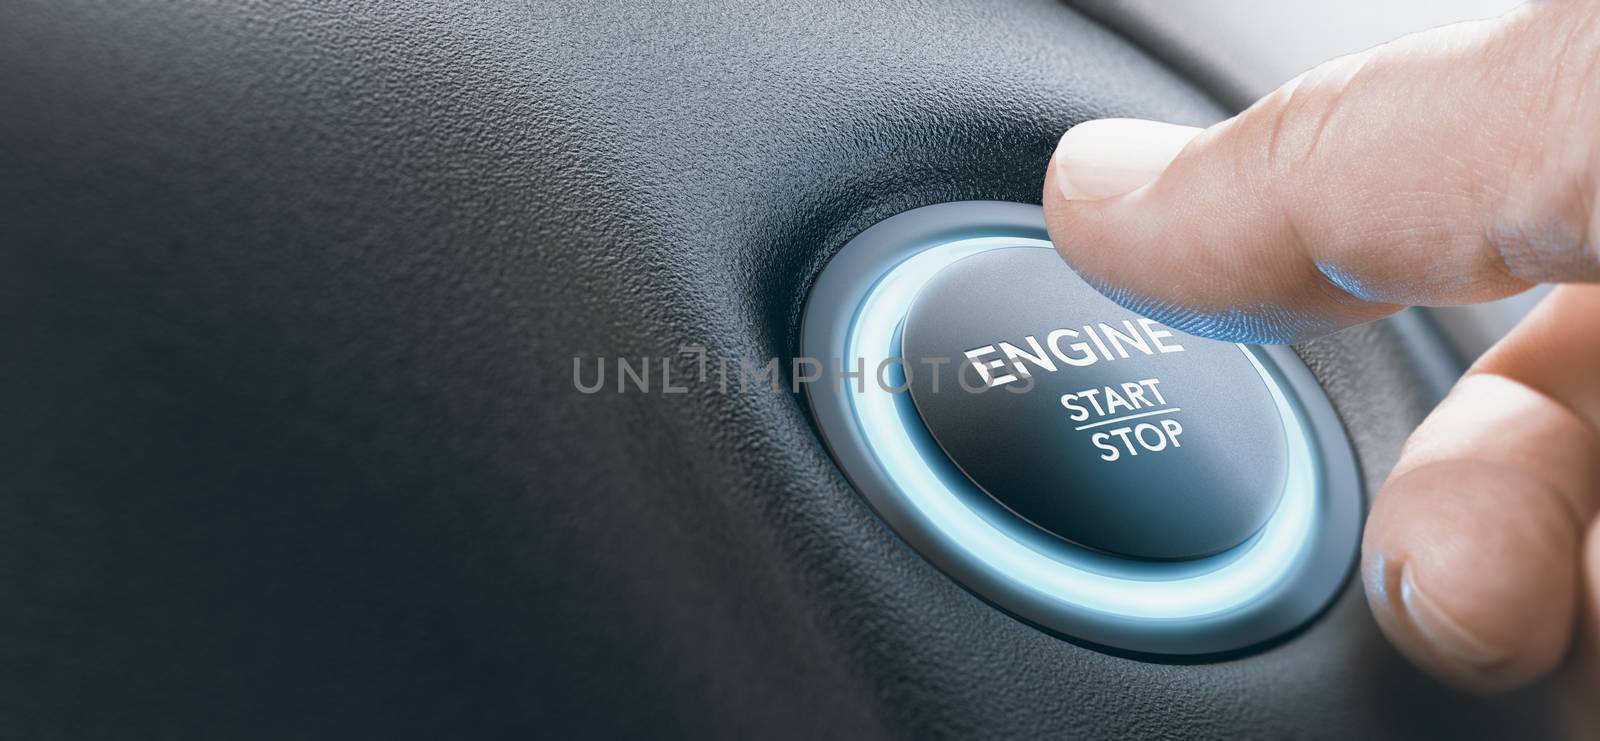 Finger pressing an engine start button with blue color. Composite image between a hand photography and a 3D background.